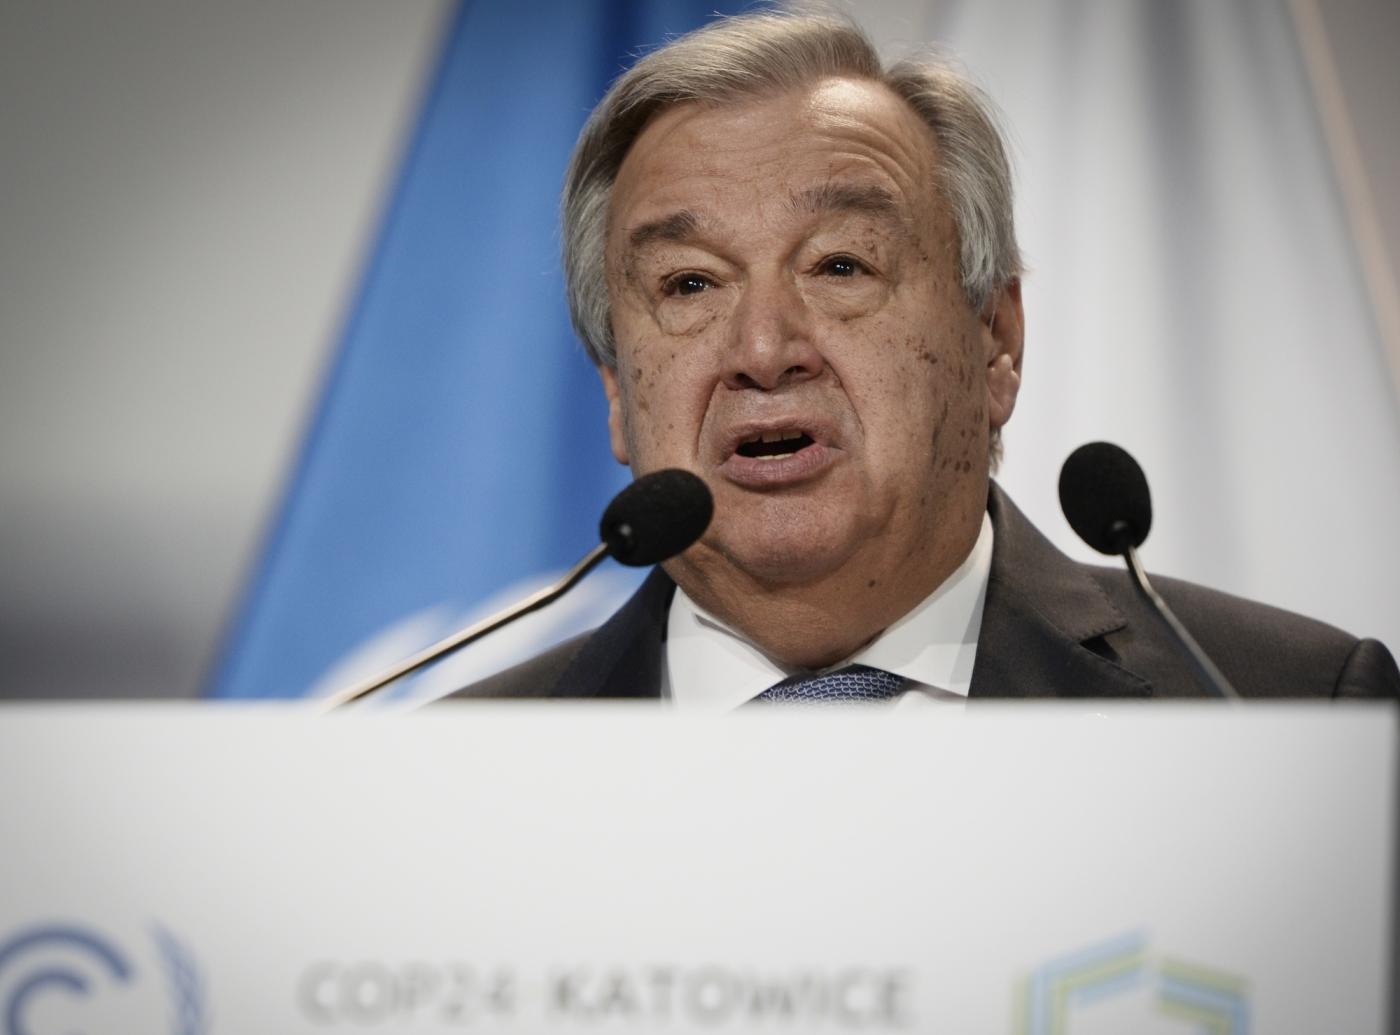 KATOWICE, Dec. 3, 2018 (Xinhua) -- United Nations (UN) Secretary-General Antonio Guterres addresses the UN Climate Change Conference in Katowice, Poland, Dec. 3, 2018. Delegates from nearly 200 countries began talks on Sunday on urgent actions to curb climate change three years after the landmark Paris Climate Change Agreement set a goal of keeping global warming below 2 degrees Celsius. The two-week UN Climate Change Conference, known as COP24, is held in the southern Polish city of Katowice. (Xinhua/Jaap Arriens/IANS) by .